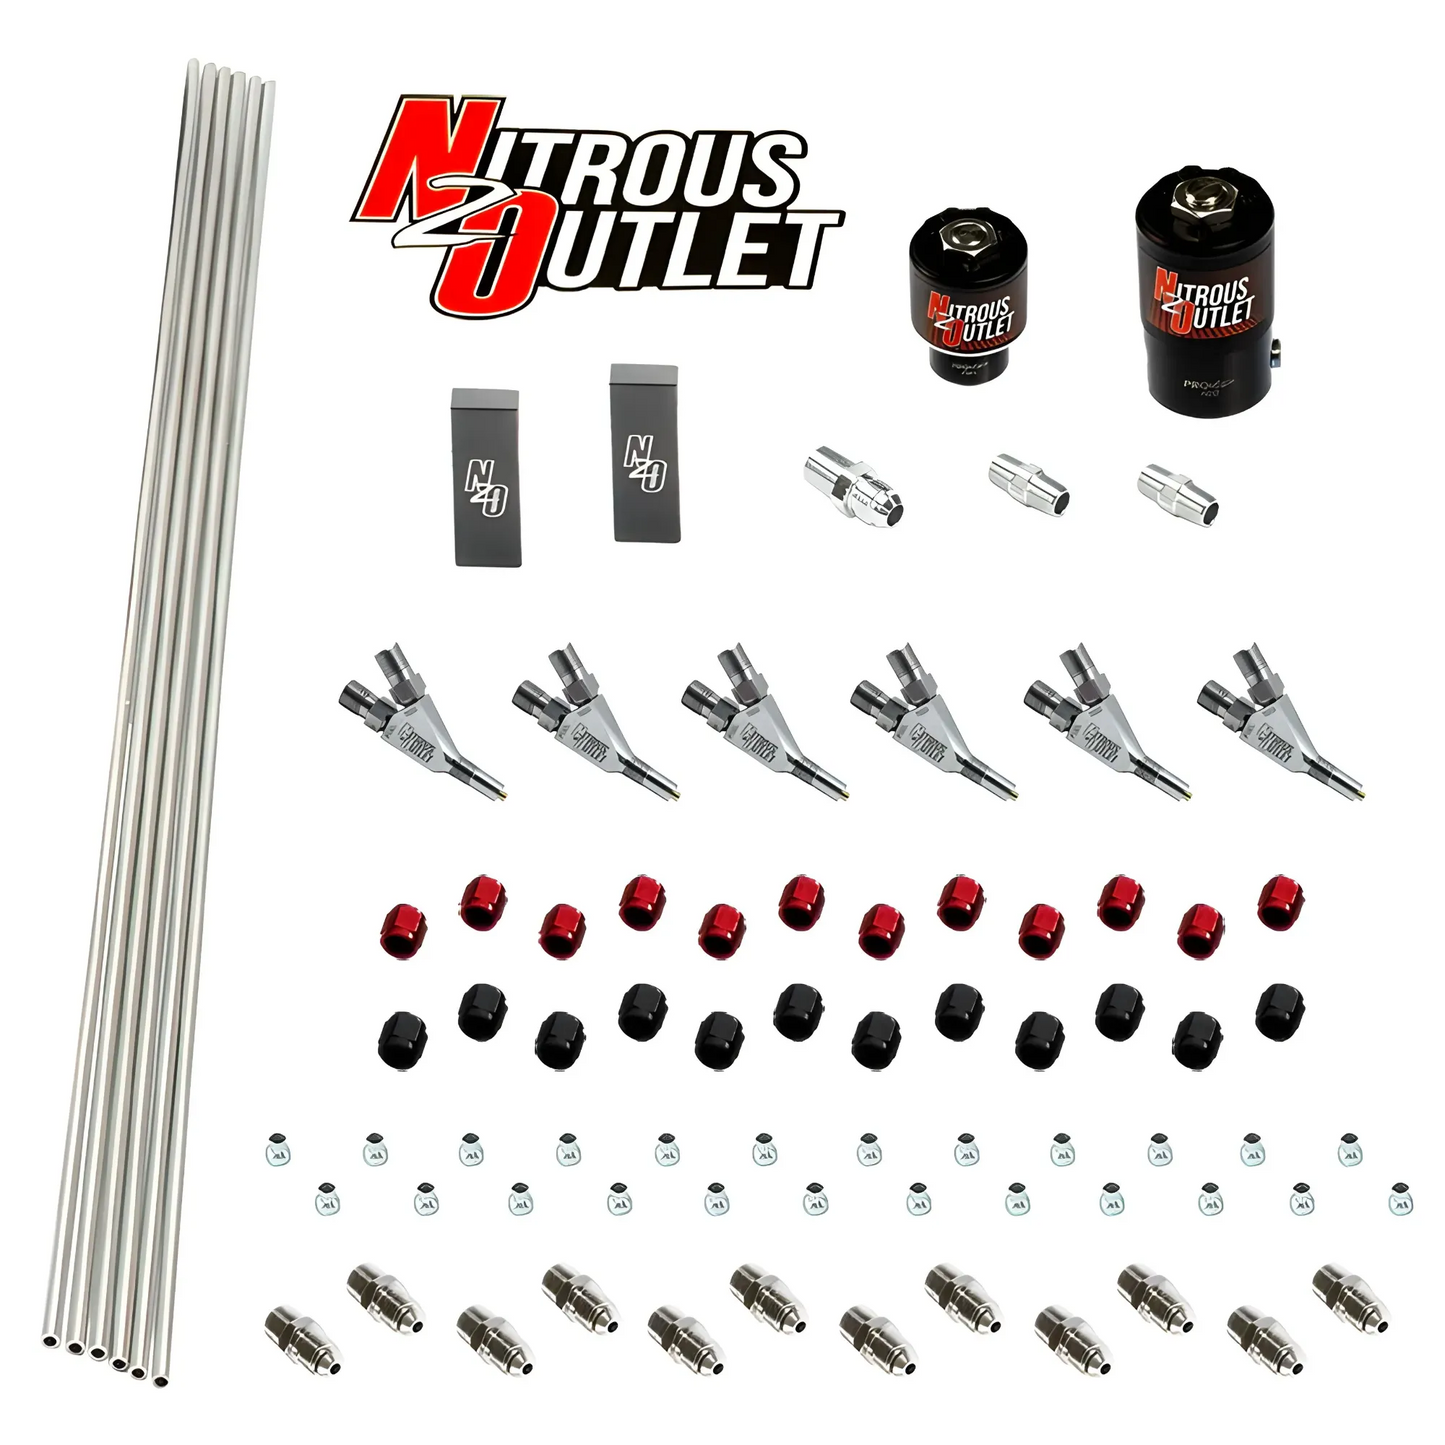 6 Cylinder 2 Solenoids Forward Plumbers Kit With Injection Rail - Straight Blow Through Nozzles